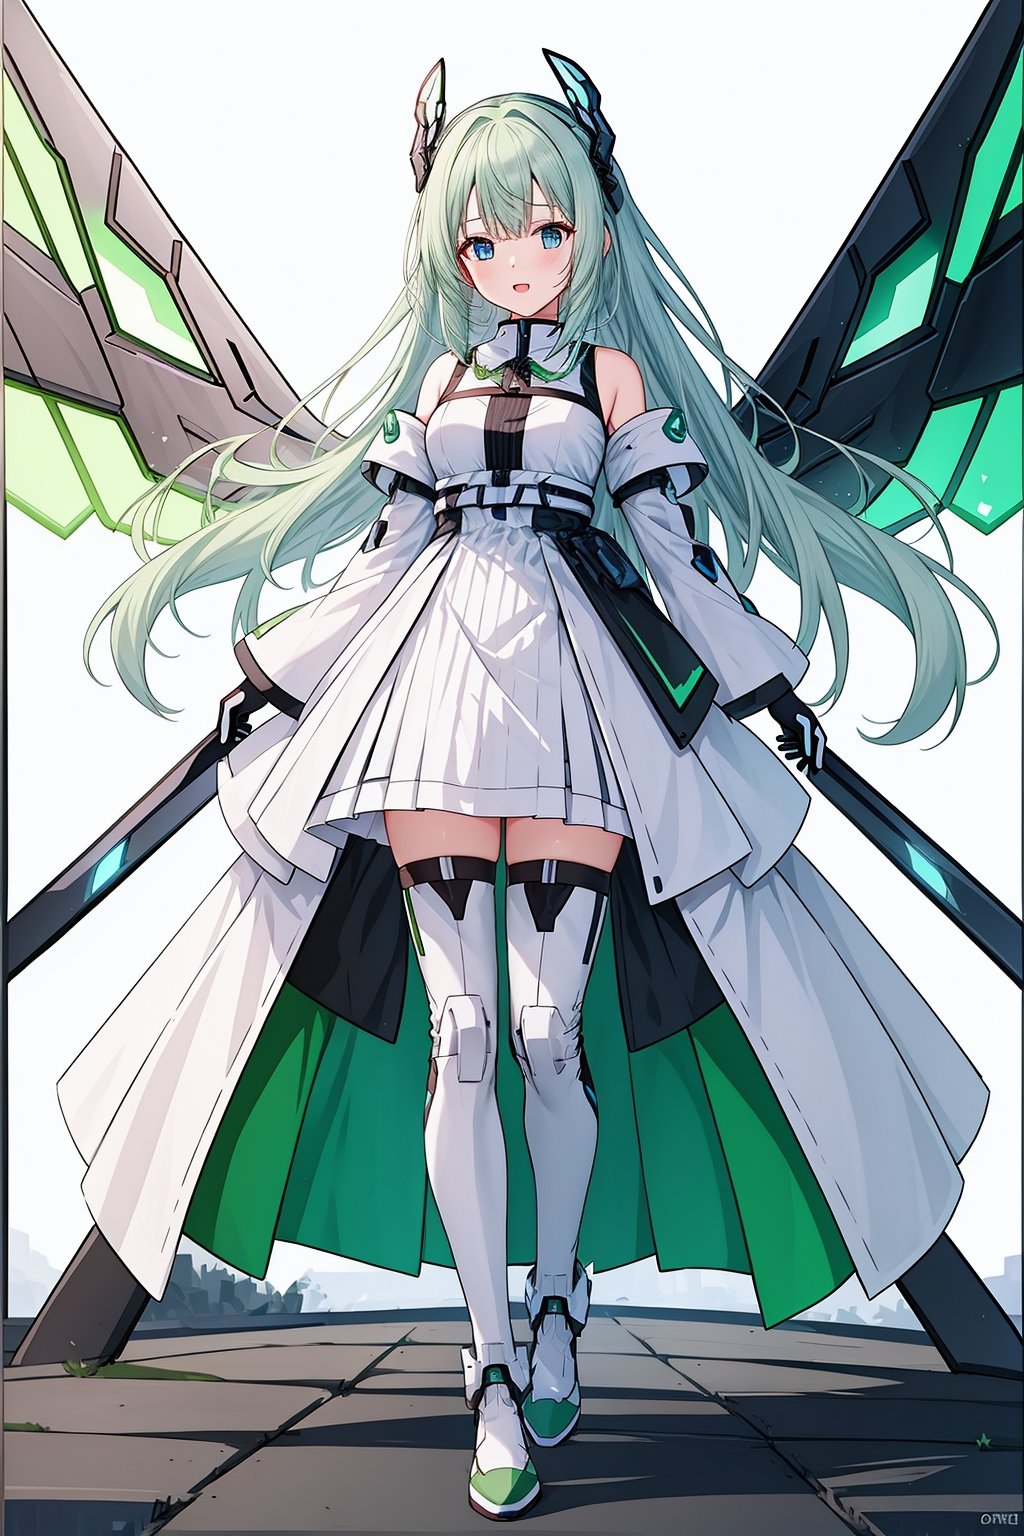 1 girl, solo, green Mecha pants, wings, blue eyes, long hair, green shoes, hair accessories, looking at the audience, white hair, hair accessories, bangs, blue eyes, staff, clean background, mechanical wings, (video card fan), gloves, white, simple background, cute, video card promo character, console, keyboard, mouse, joypad, red clothes, festive, Green theme,<lora:天启姬:0.7>,